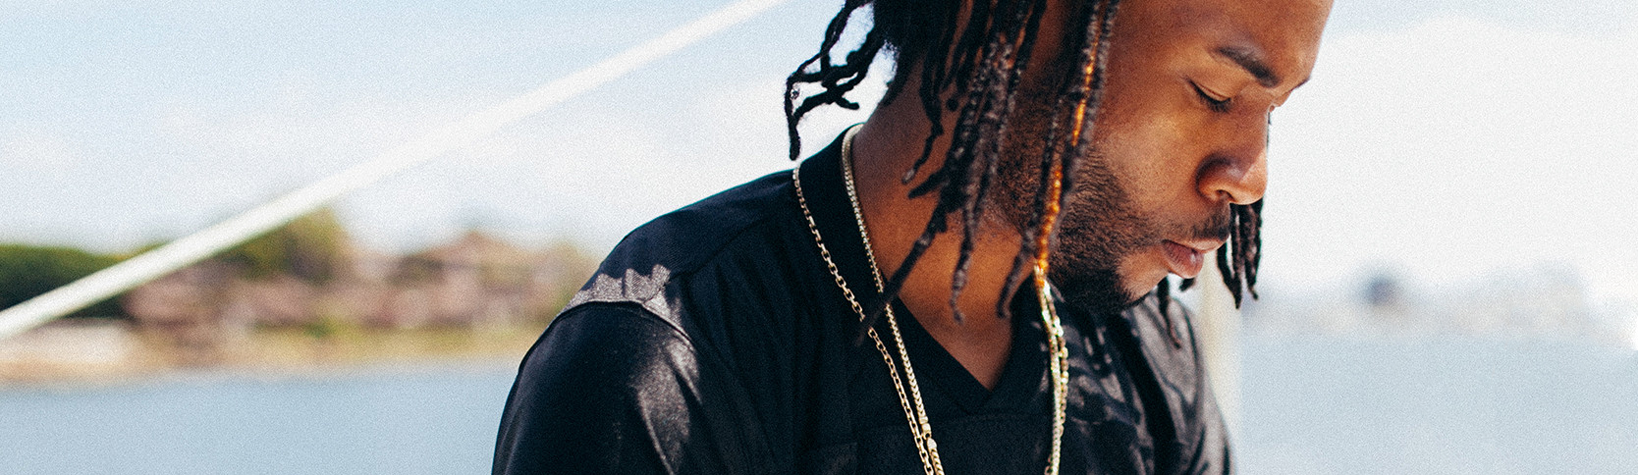 Partynextdoor Booking Book For Live Shows Events